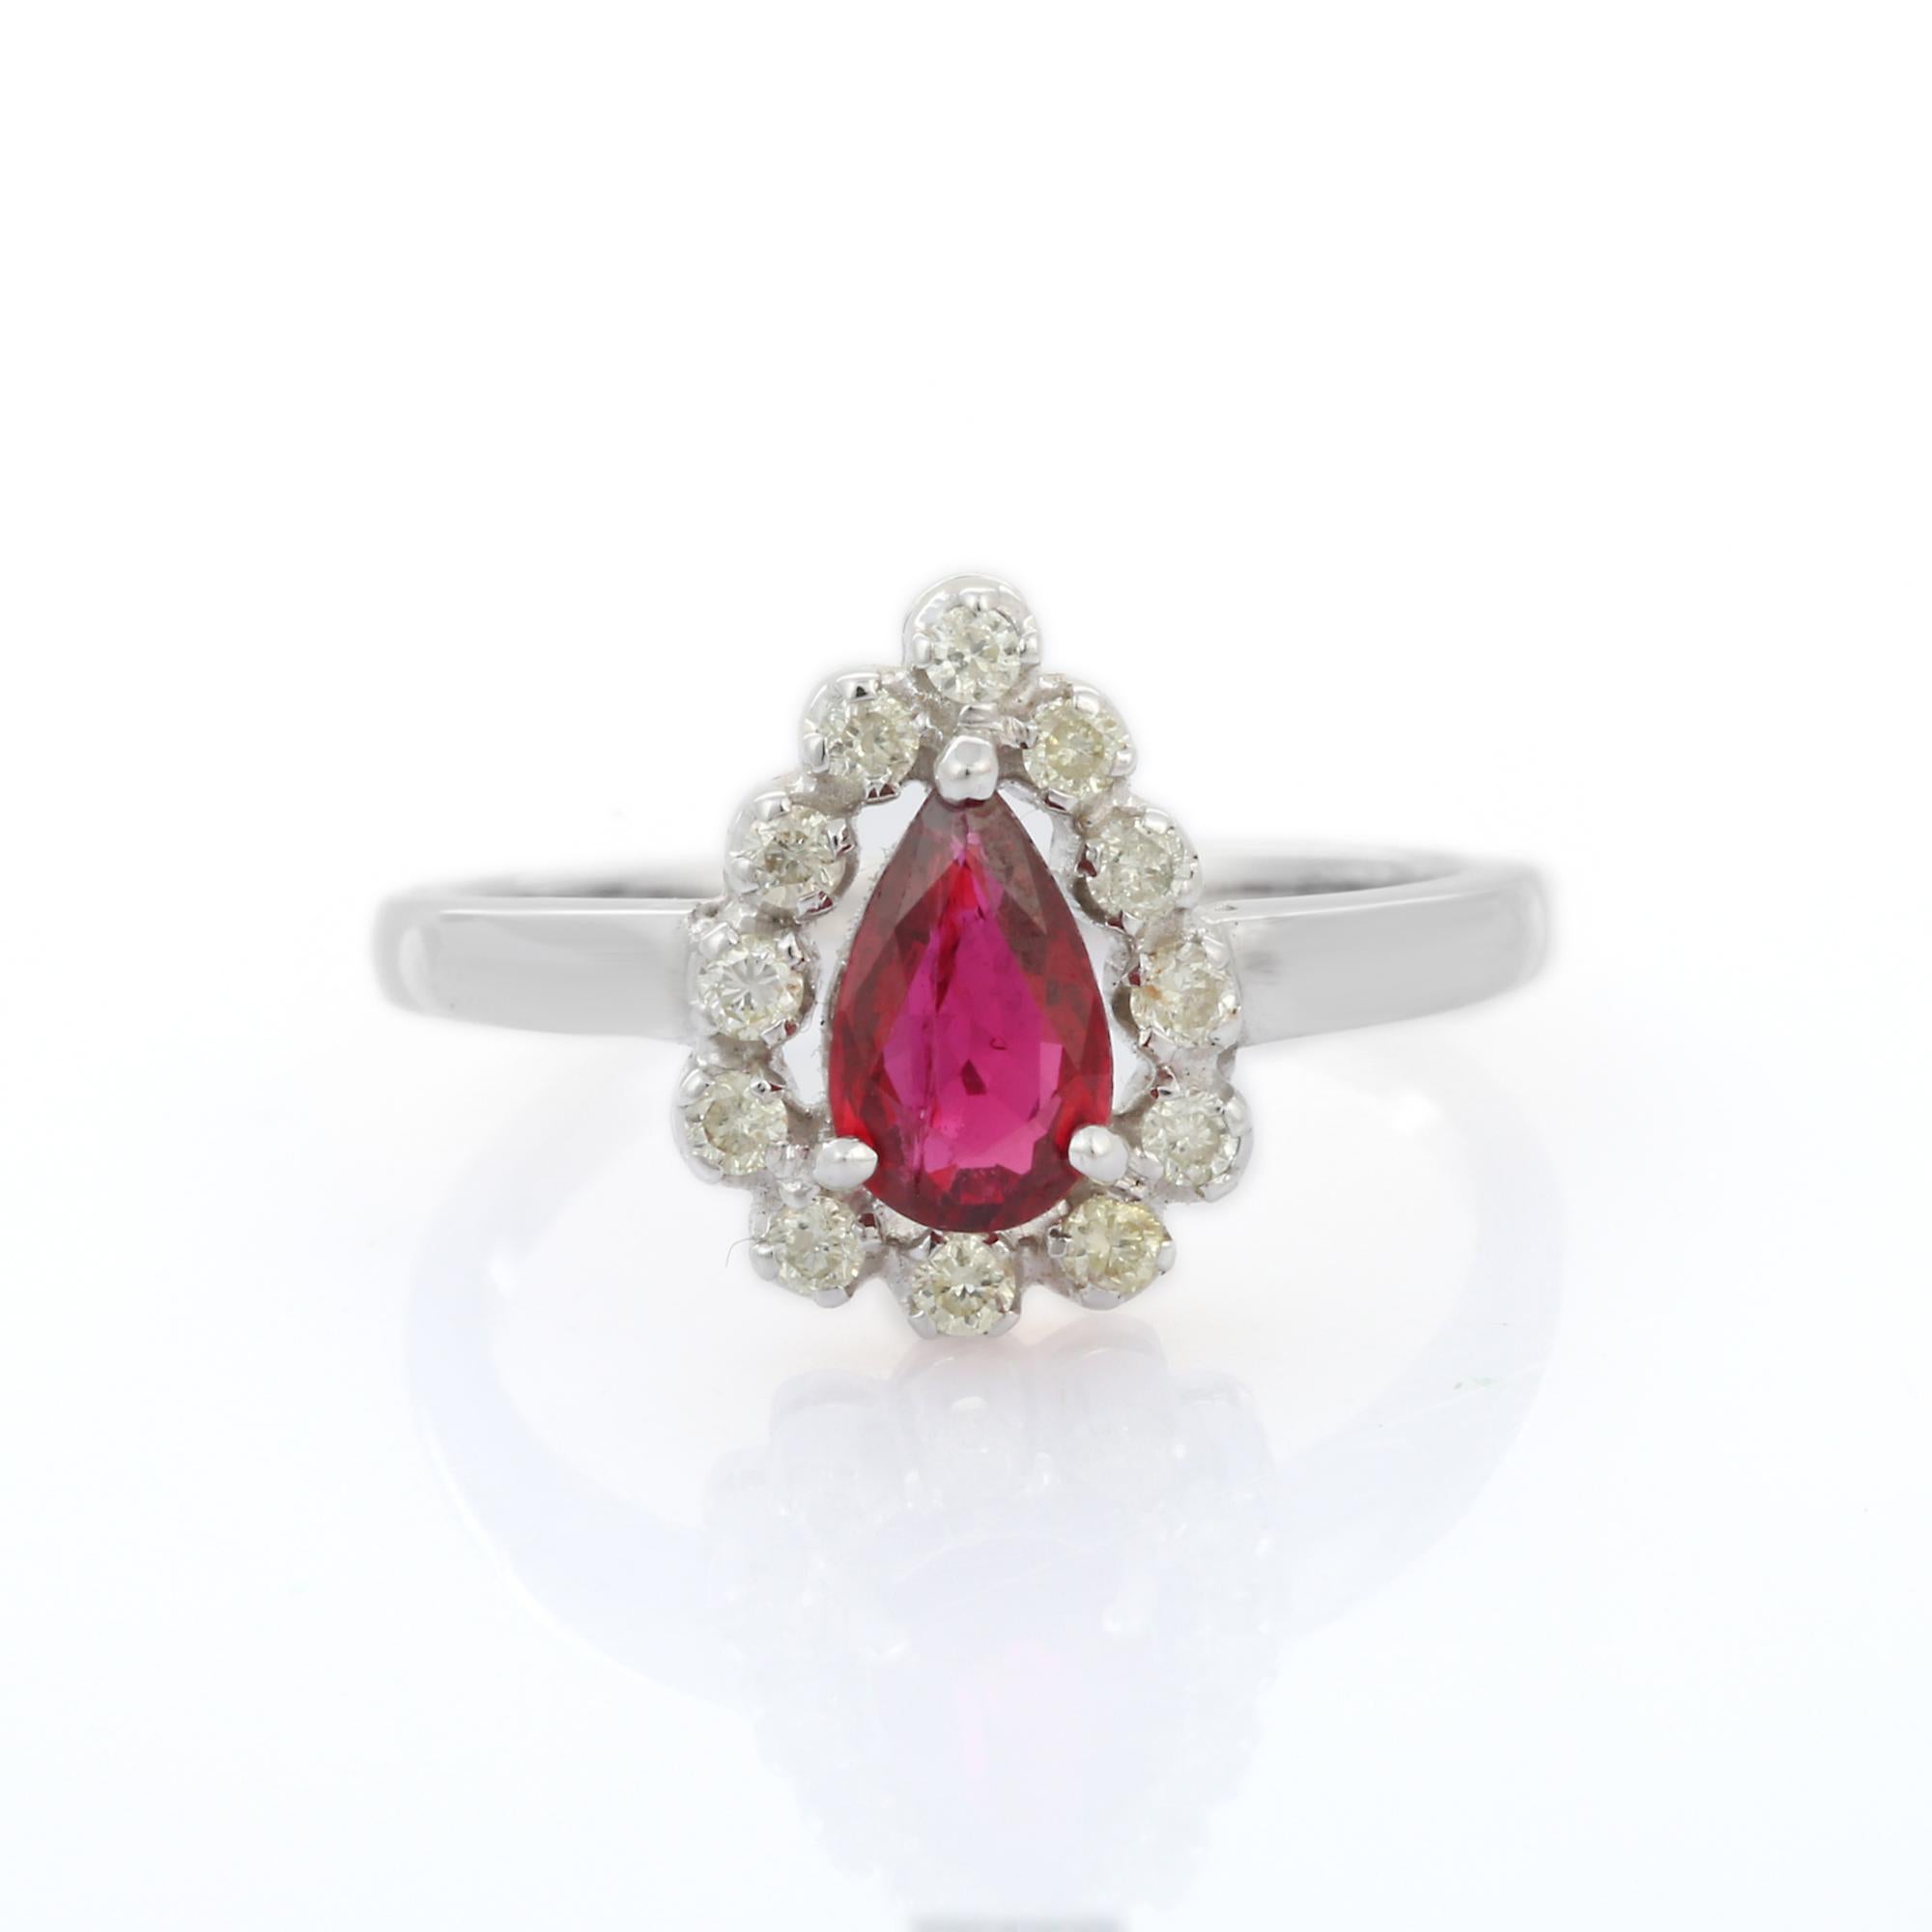 For Sale:  Pear Cut Ruby Diamond Engagement Ring in 14K White Gold  6